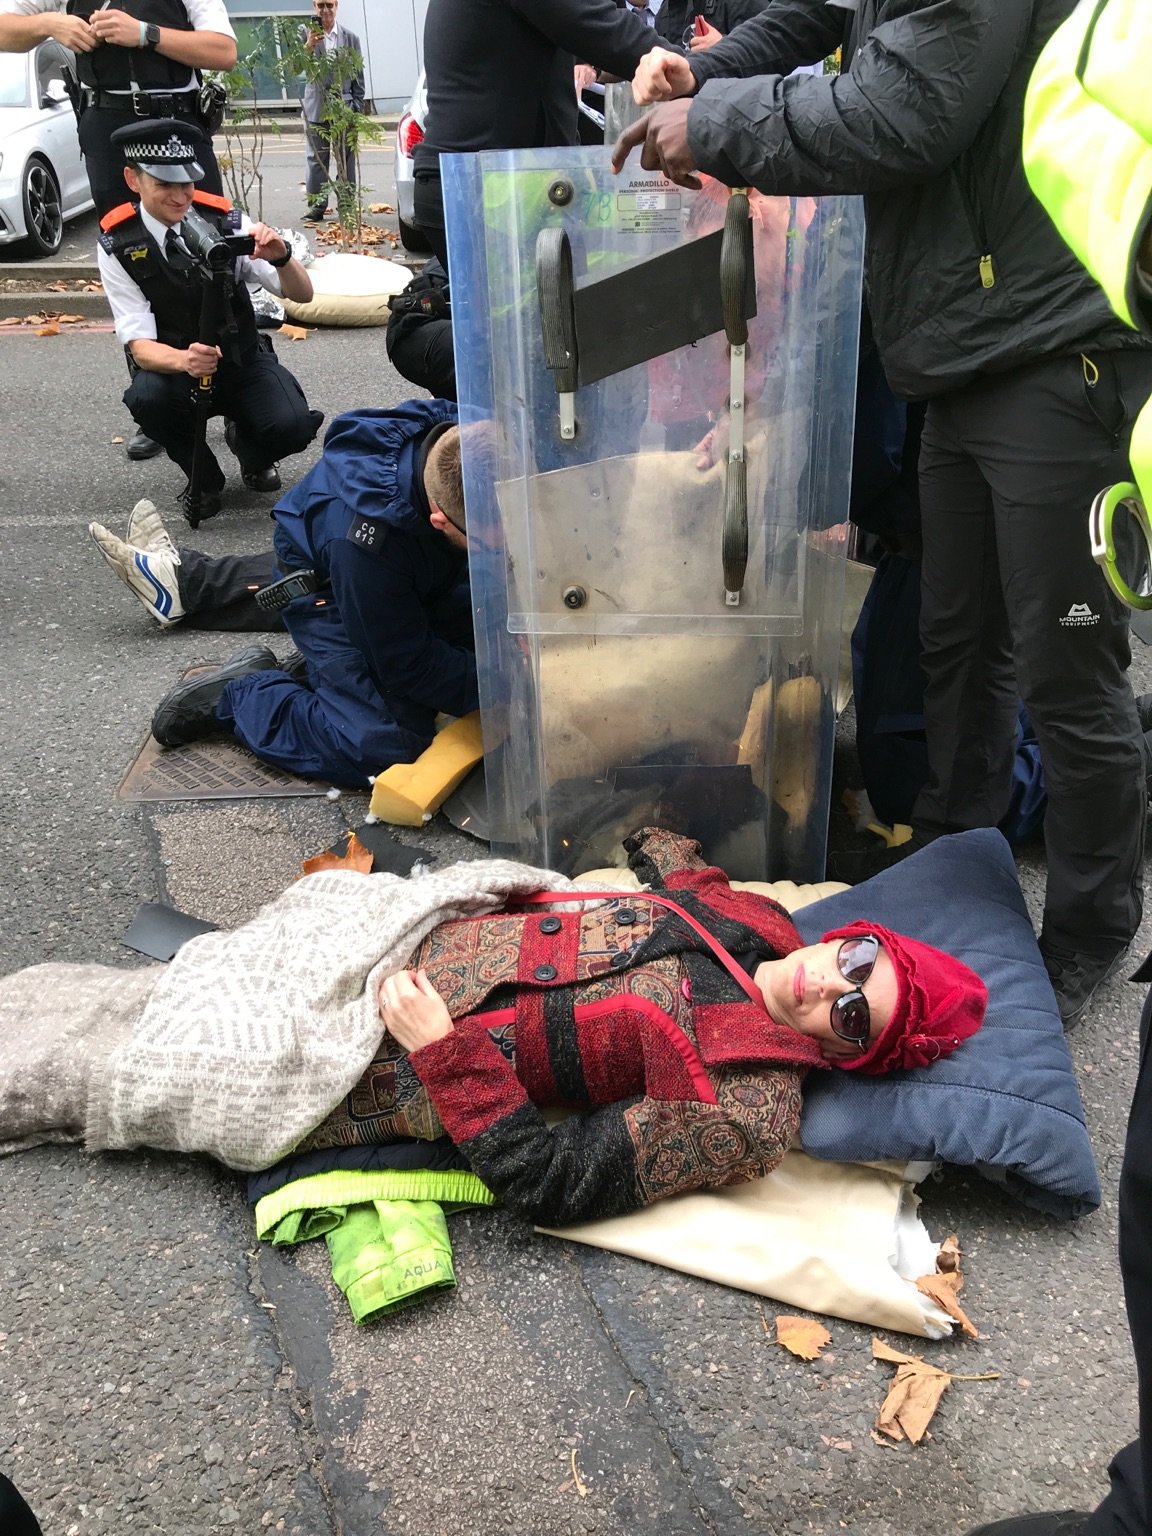 Protestors lying in a road with police around them. One police officer is videoing. Others appear to be removing lock-ons.